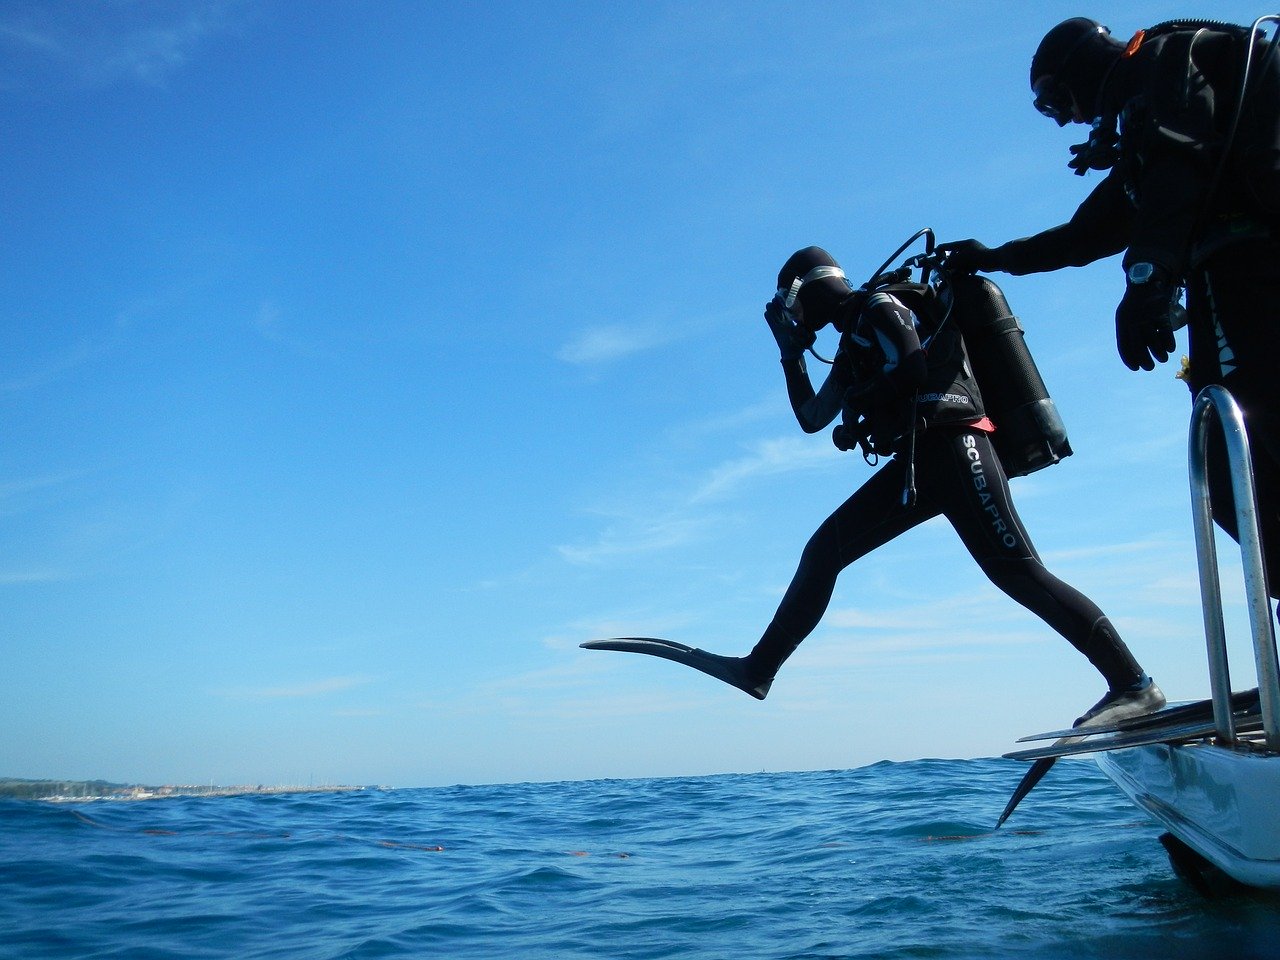 Why Do I Need My Advanced Scuba Diver Certification?